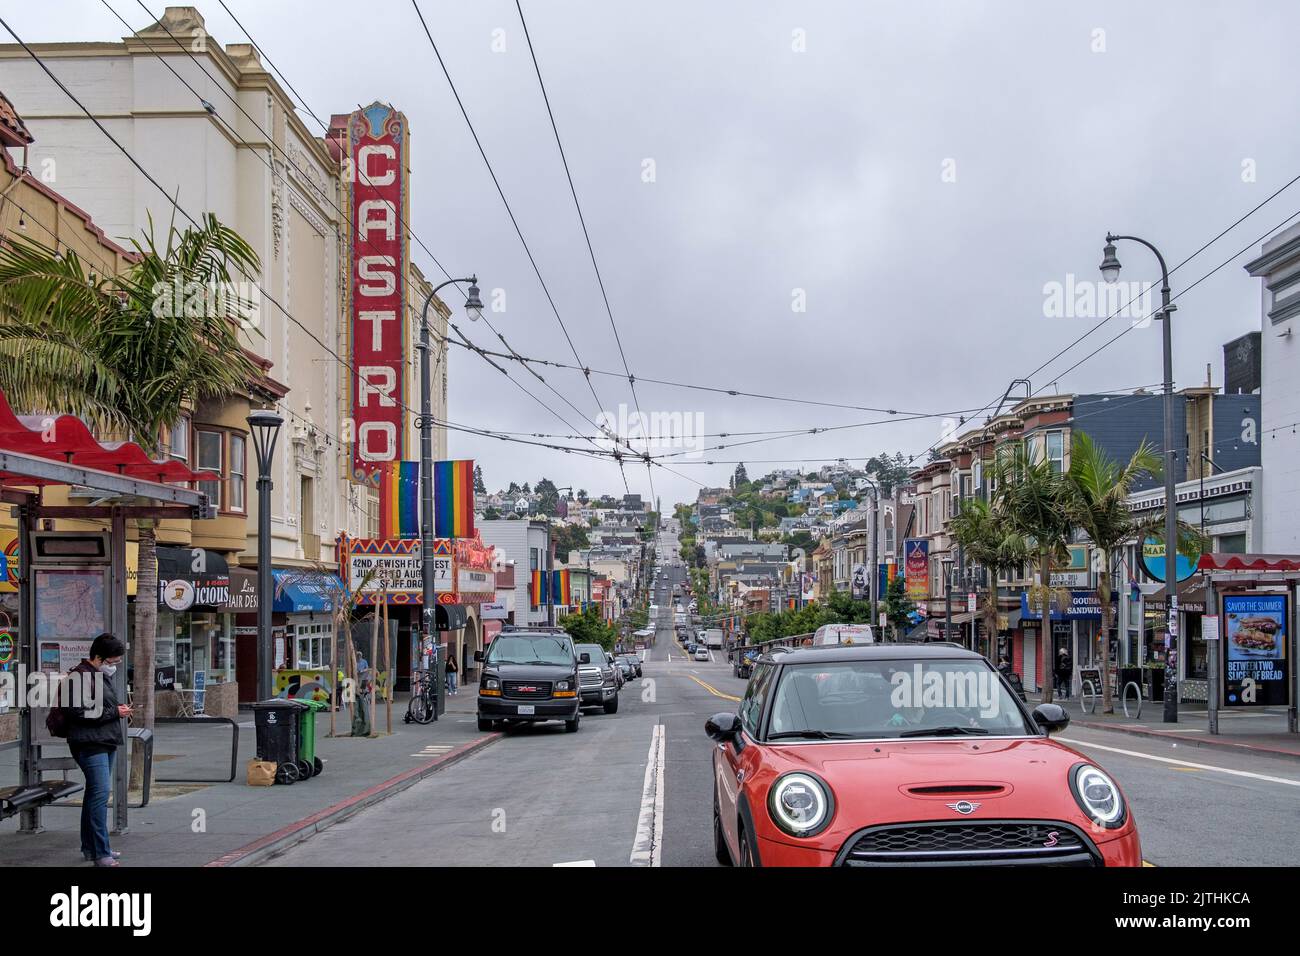 Castro district of San Francisco with Historic Castro Theatre, shops and houses on the hill. Stock Photo